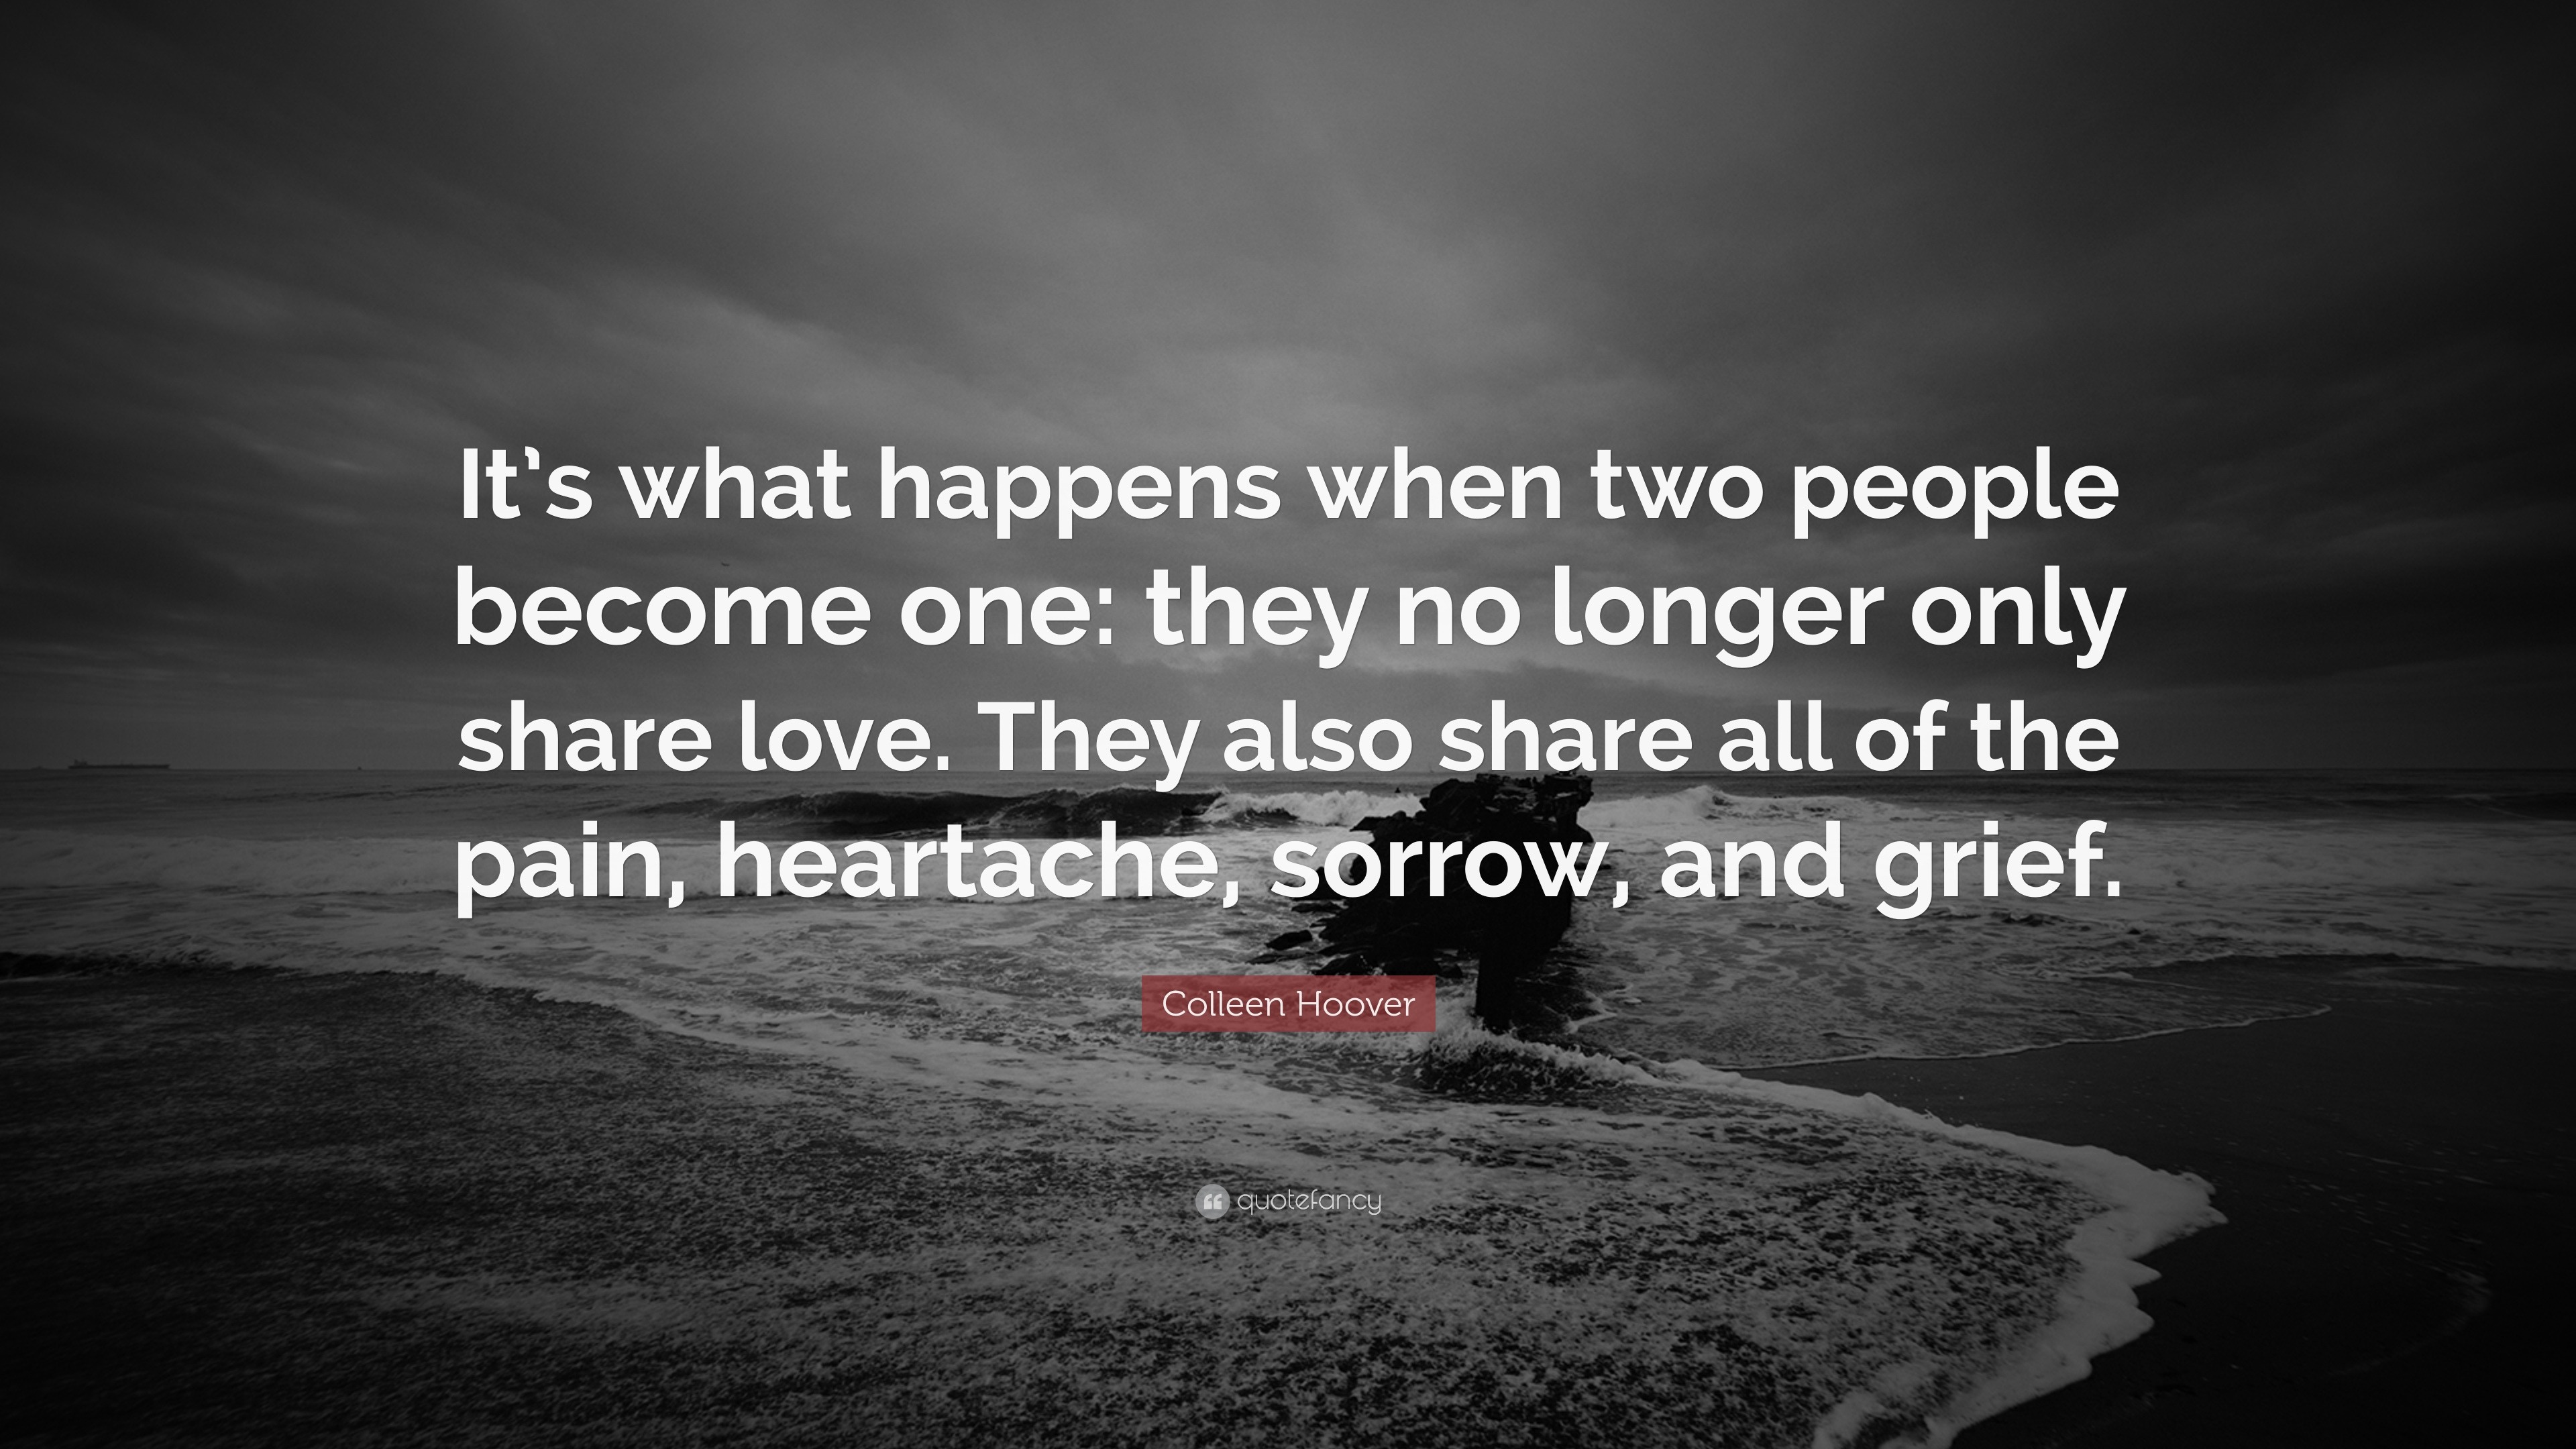 Colleen Hoover Quote: “It’s what happens when two people become one ...